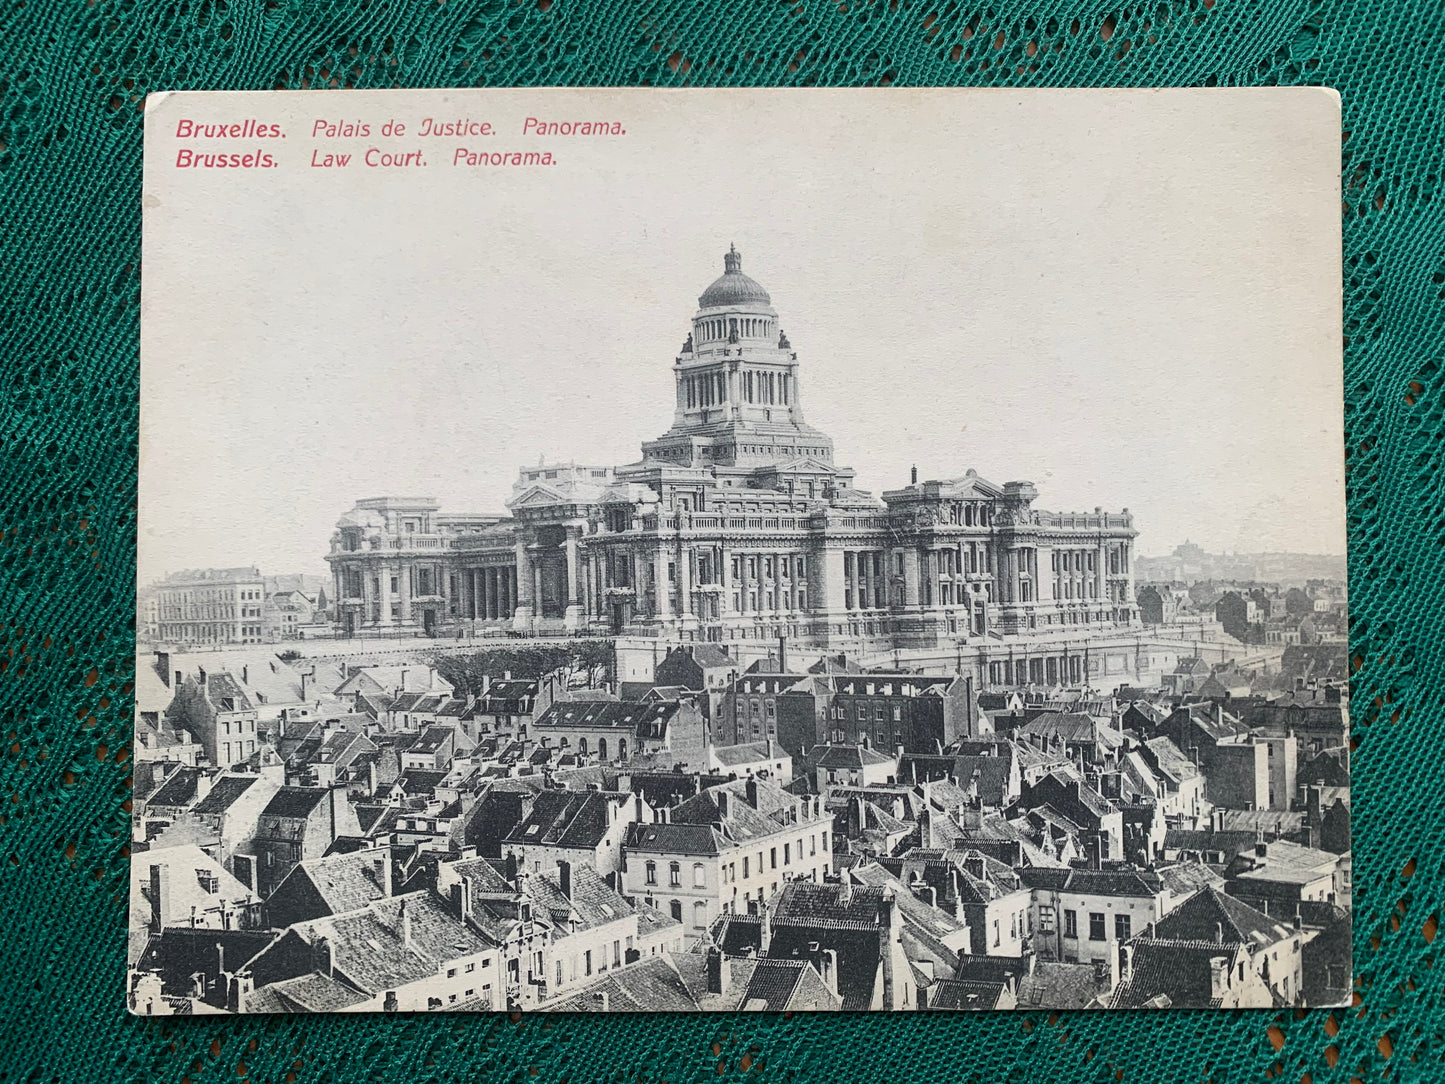 Old postcard - Bruxelles - Palais de Justice - Panorama - Brussels - Law Court - Belgium - early 1900's